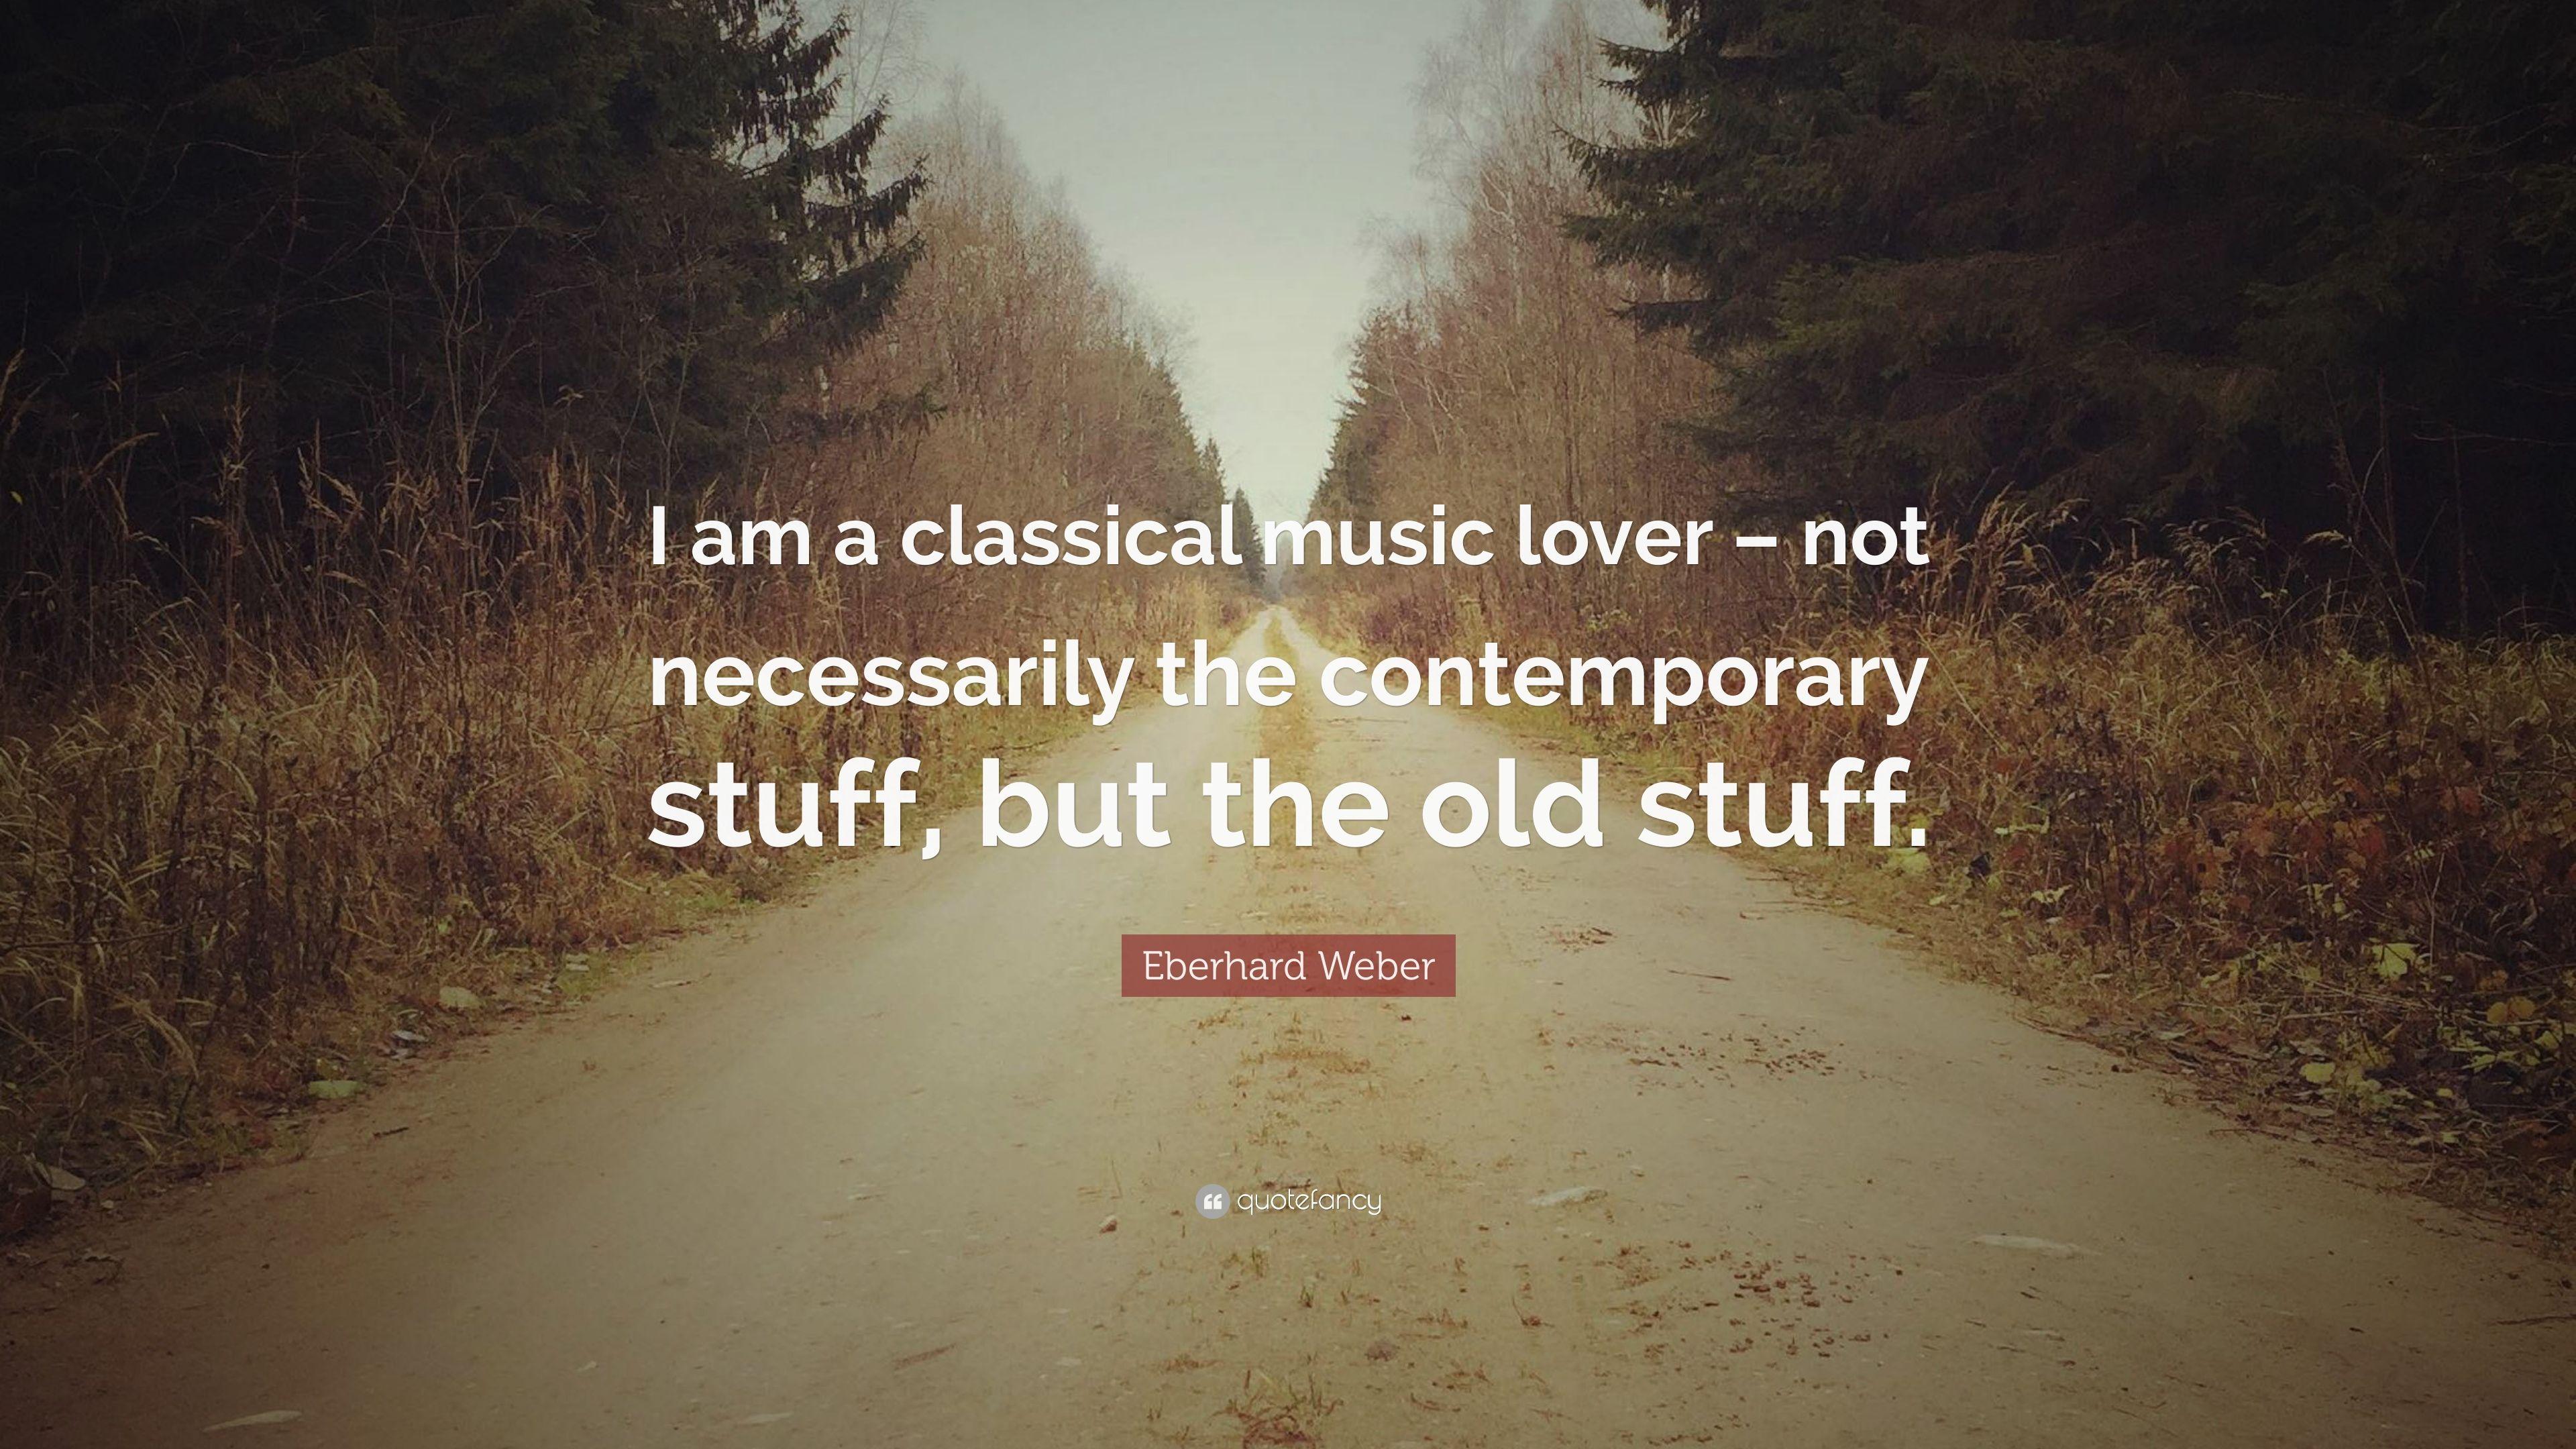 Eberhard Weber Quote: “I am a classical music lover